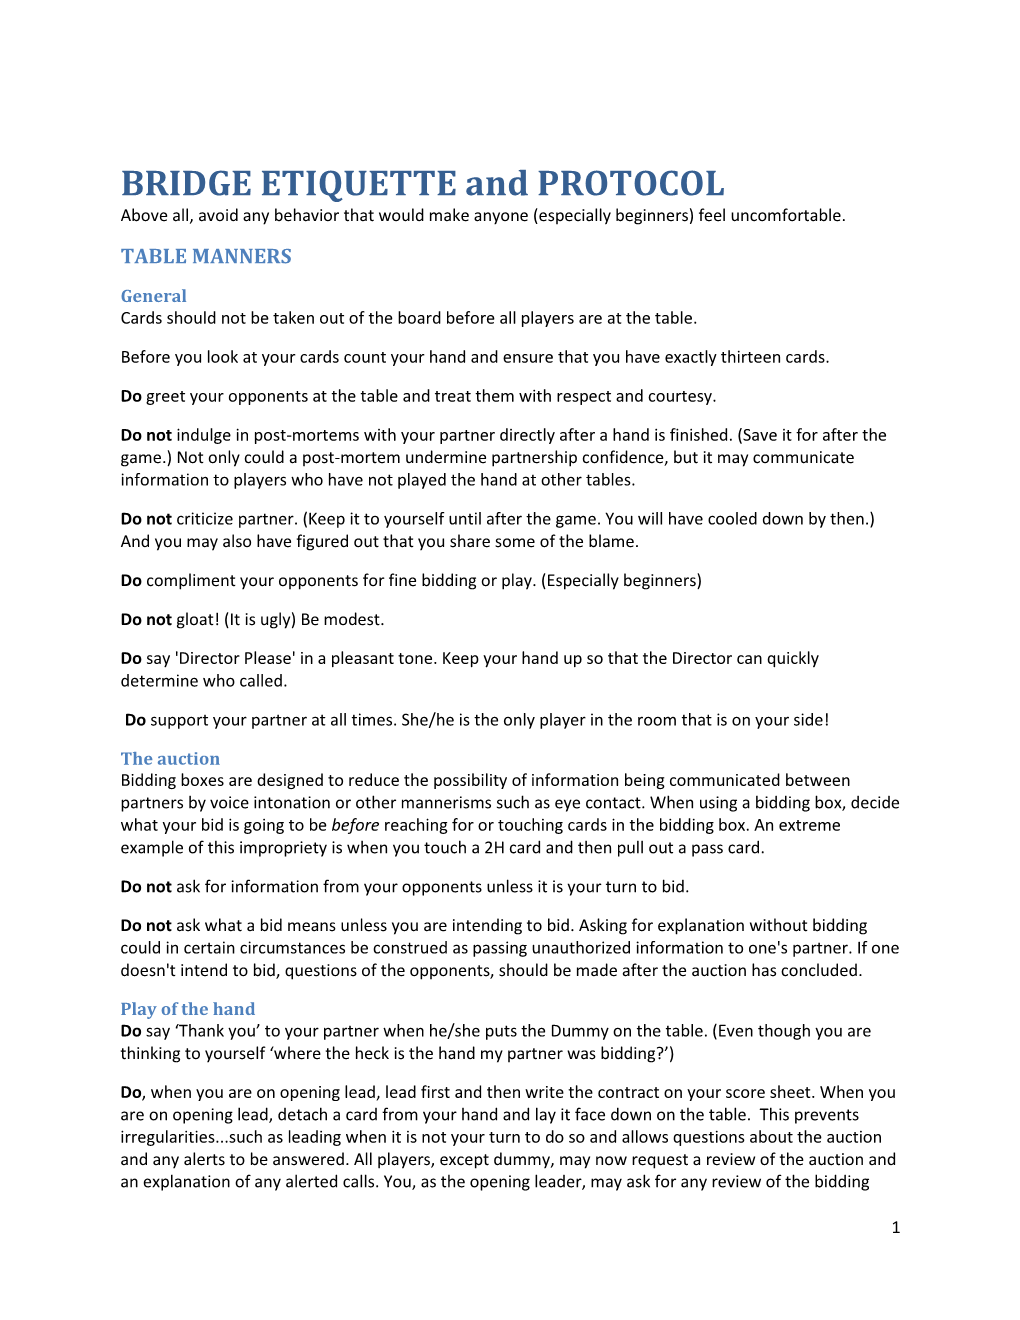 BRIDGE ETIQUETTE and PROTOCOL Above All, Avoid Any Behavior That Would Make Anyone (Especially Beginners) Feel Uncomfortable